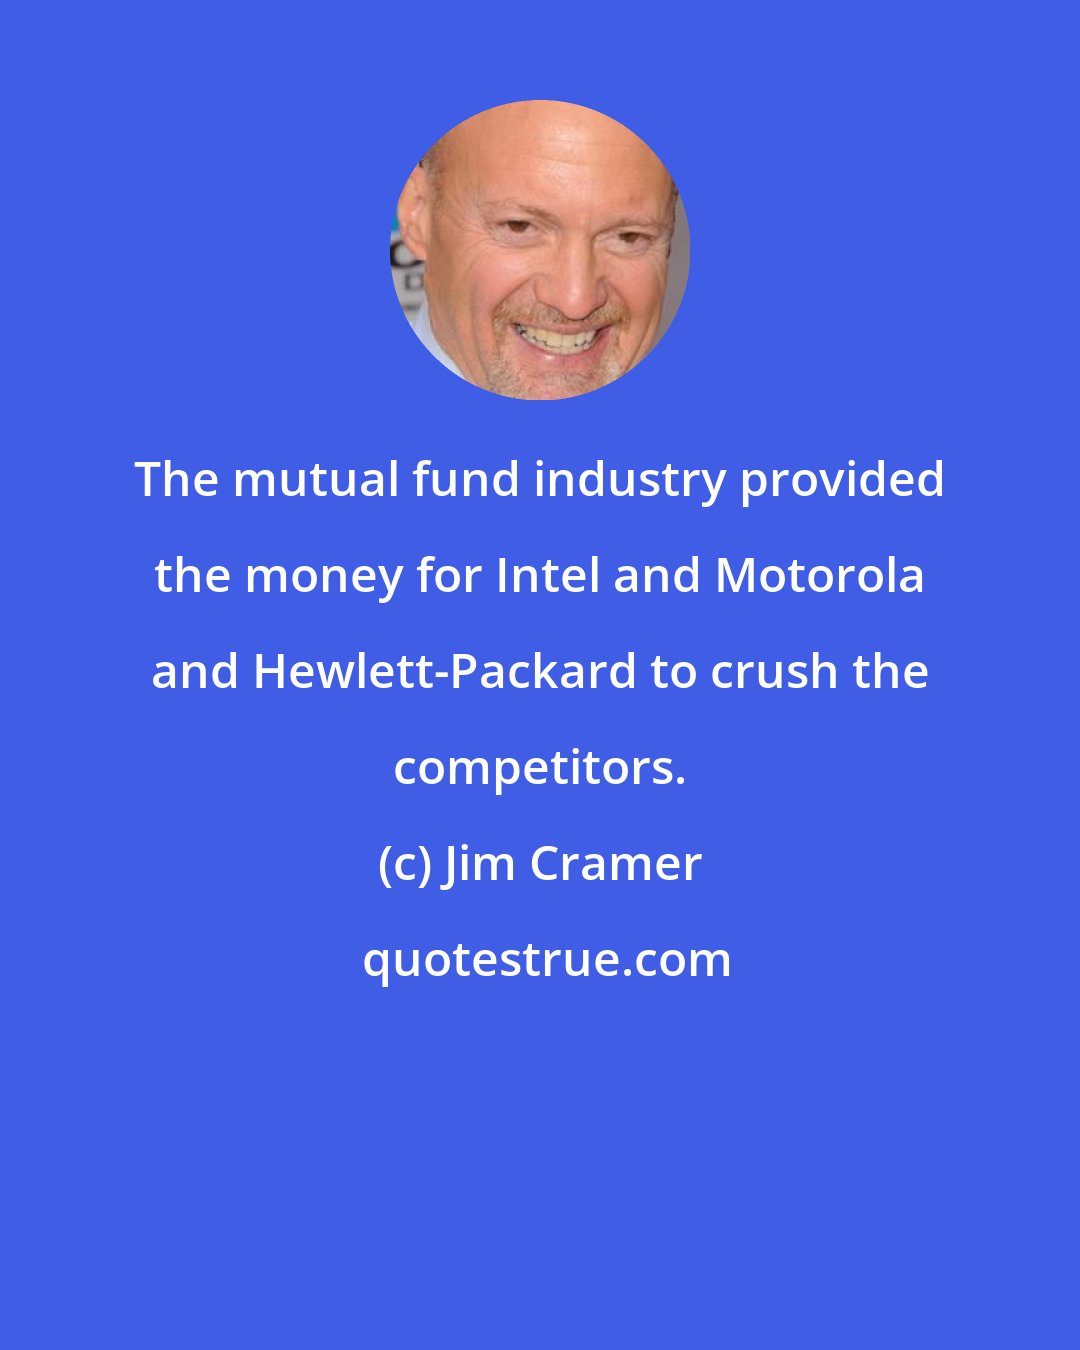 Jim Cramer: The mutual fund industry provided the money for Intel and Motorola and Hewlett-Packard to crush the competitors.